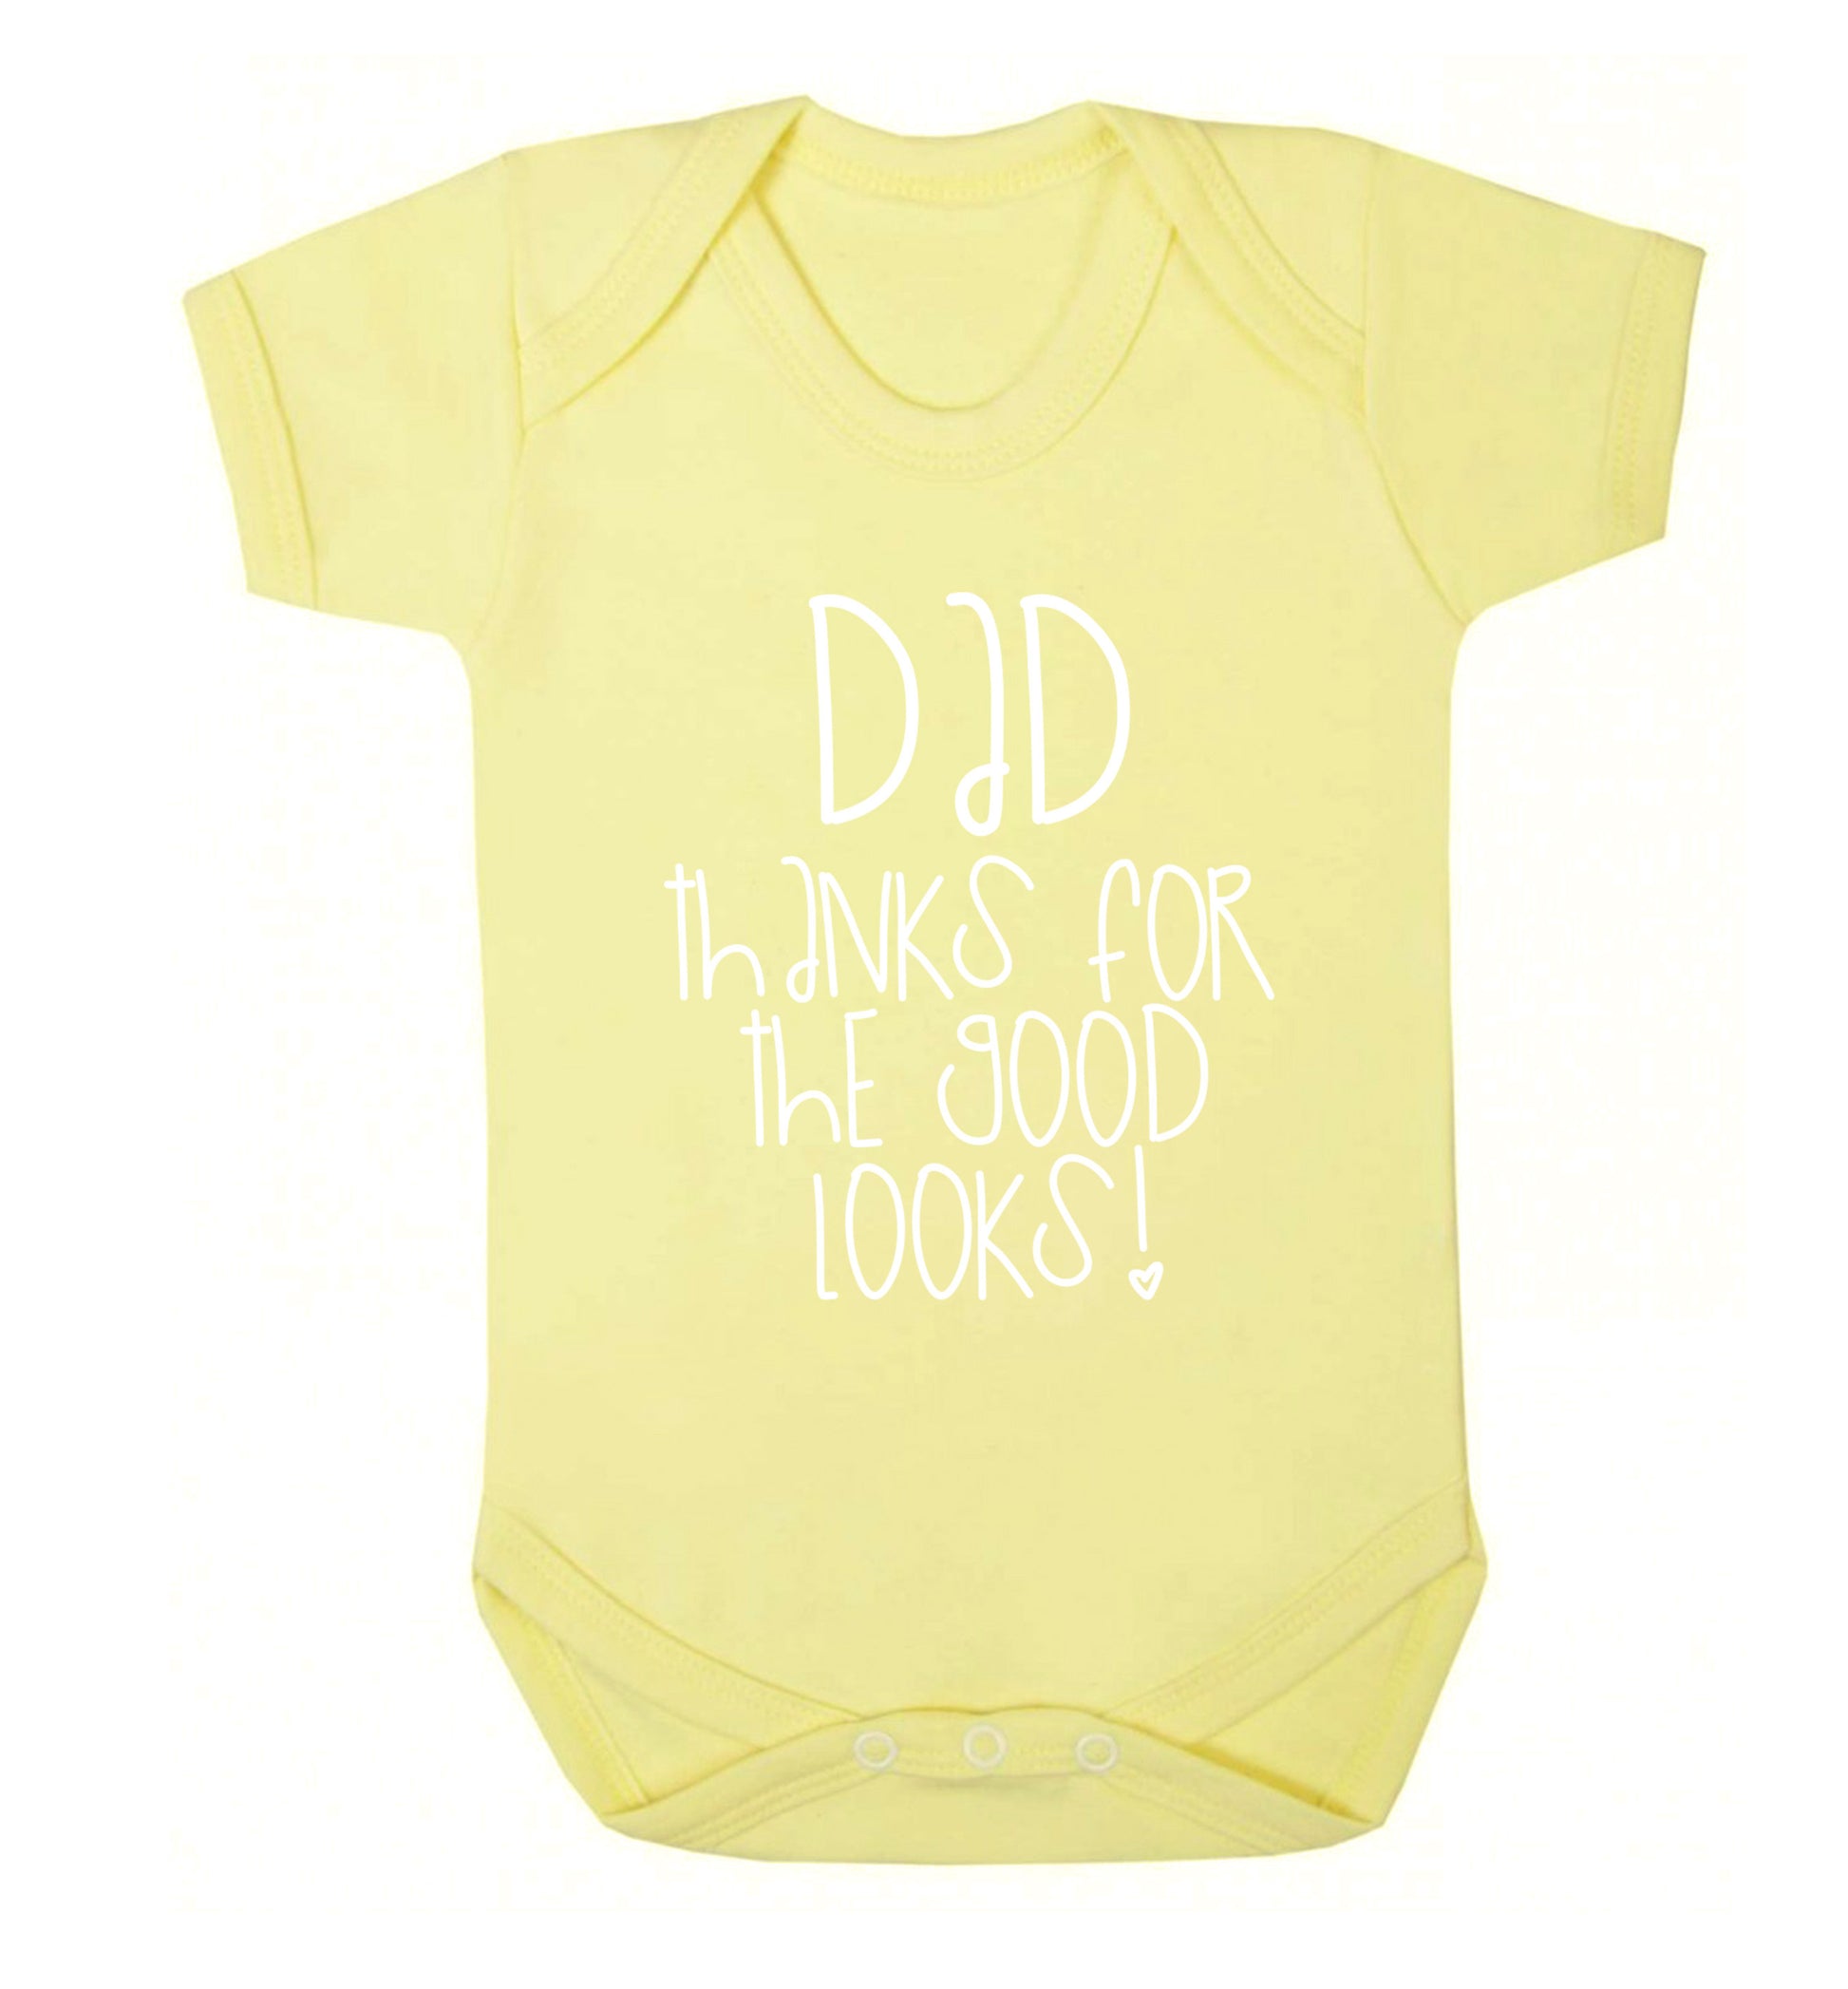 Dad thanks for the good looks Baby Vest pale yellow 18-24 months